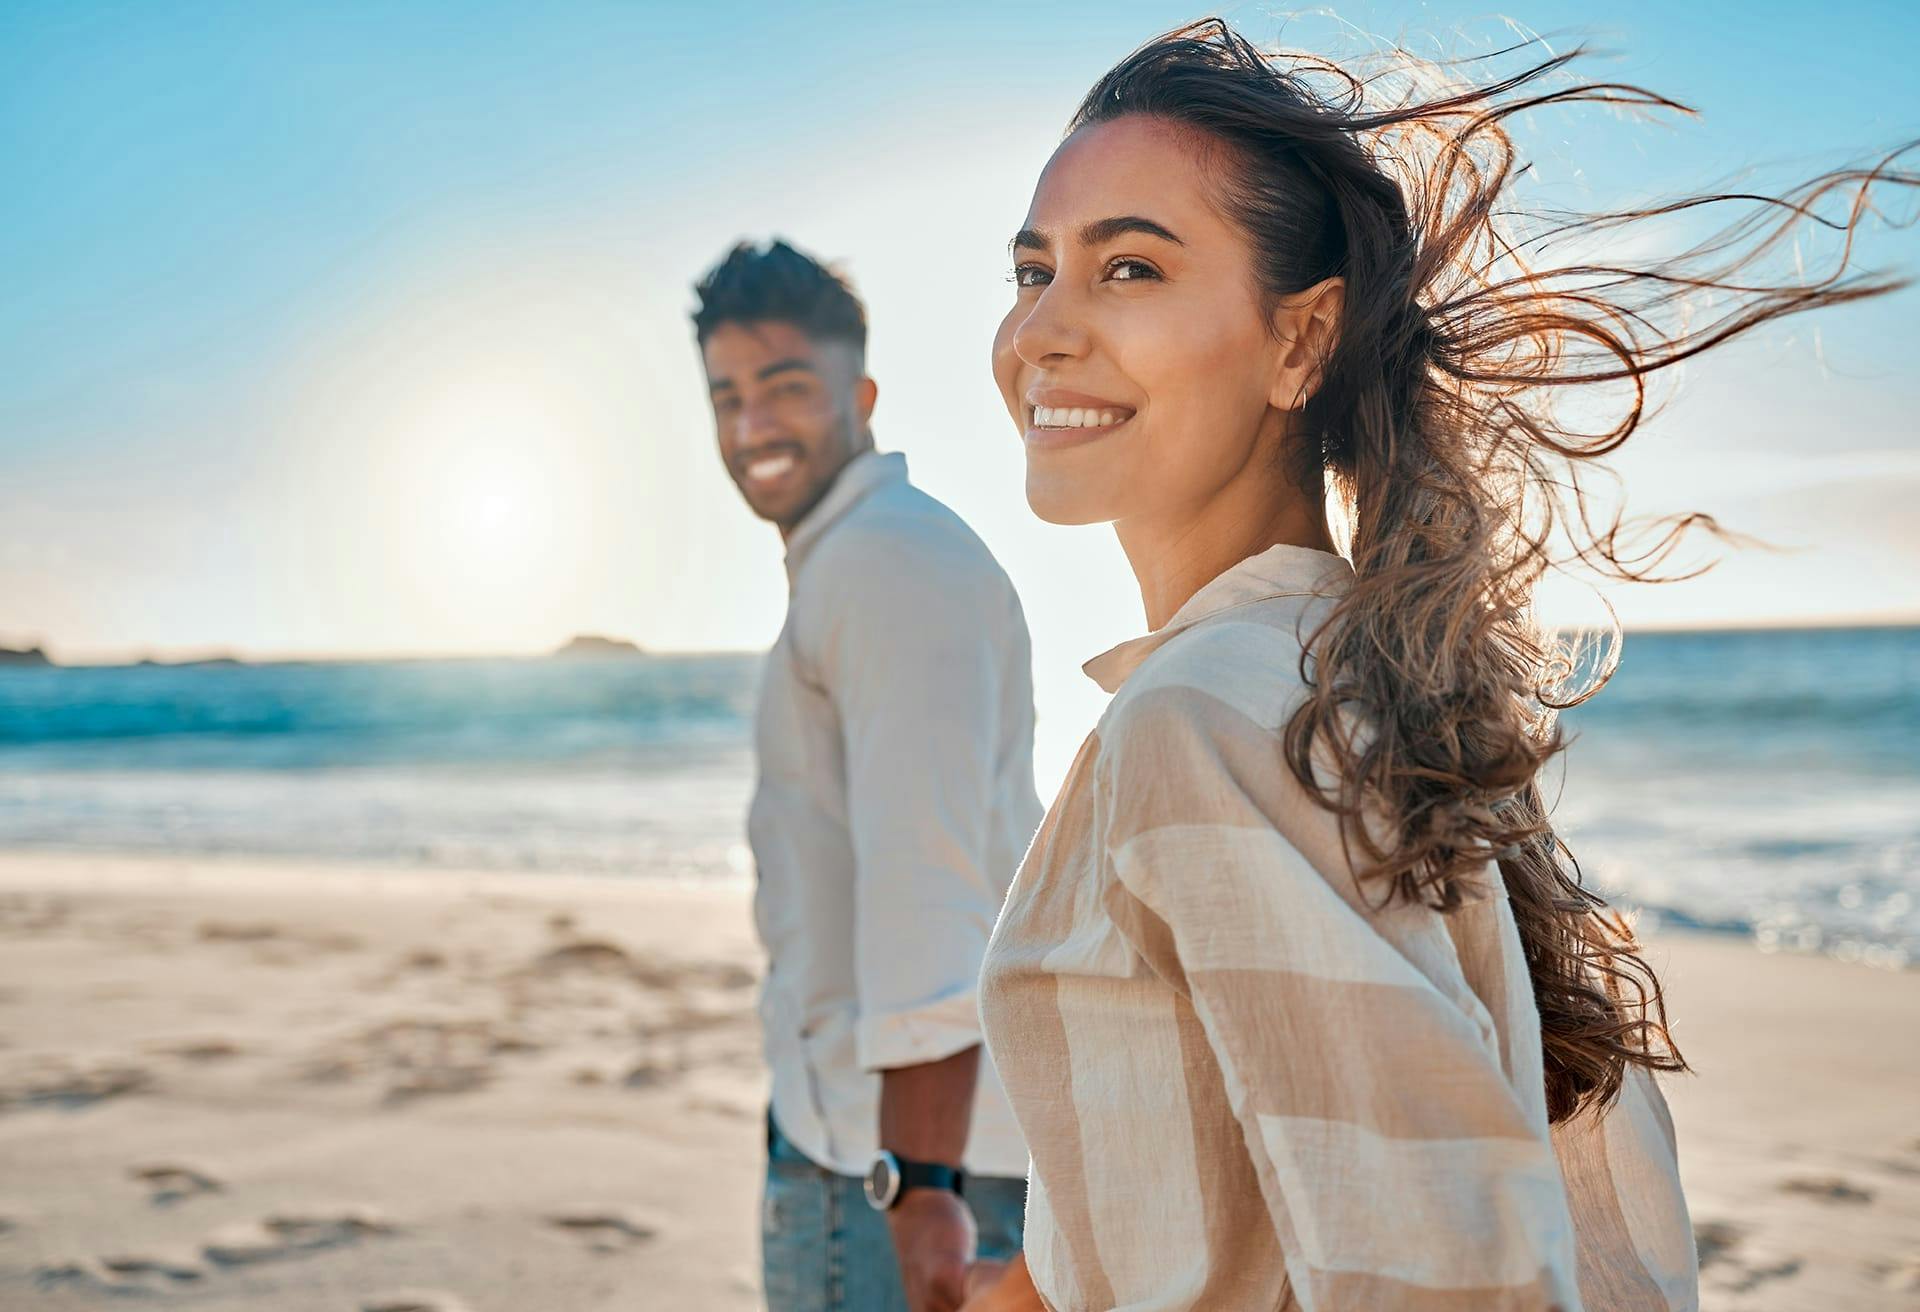 Man and woman on the beach, smiling